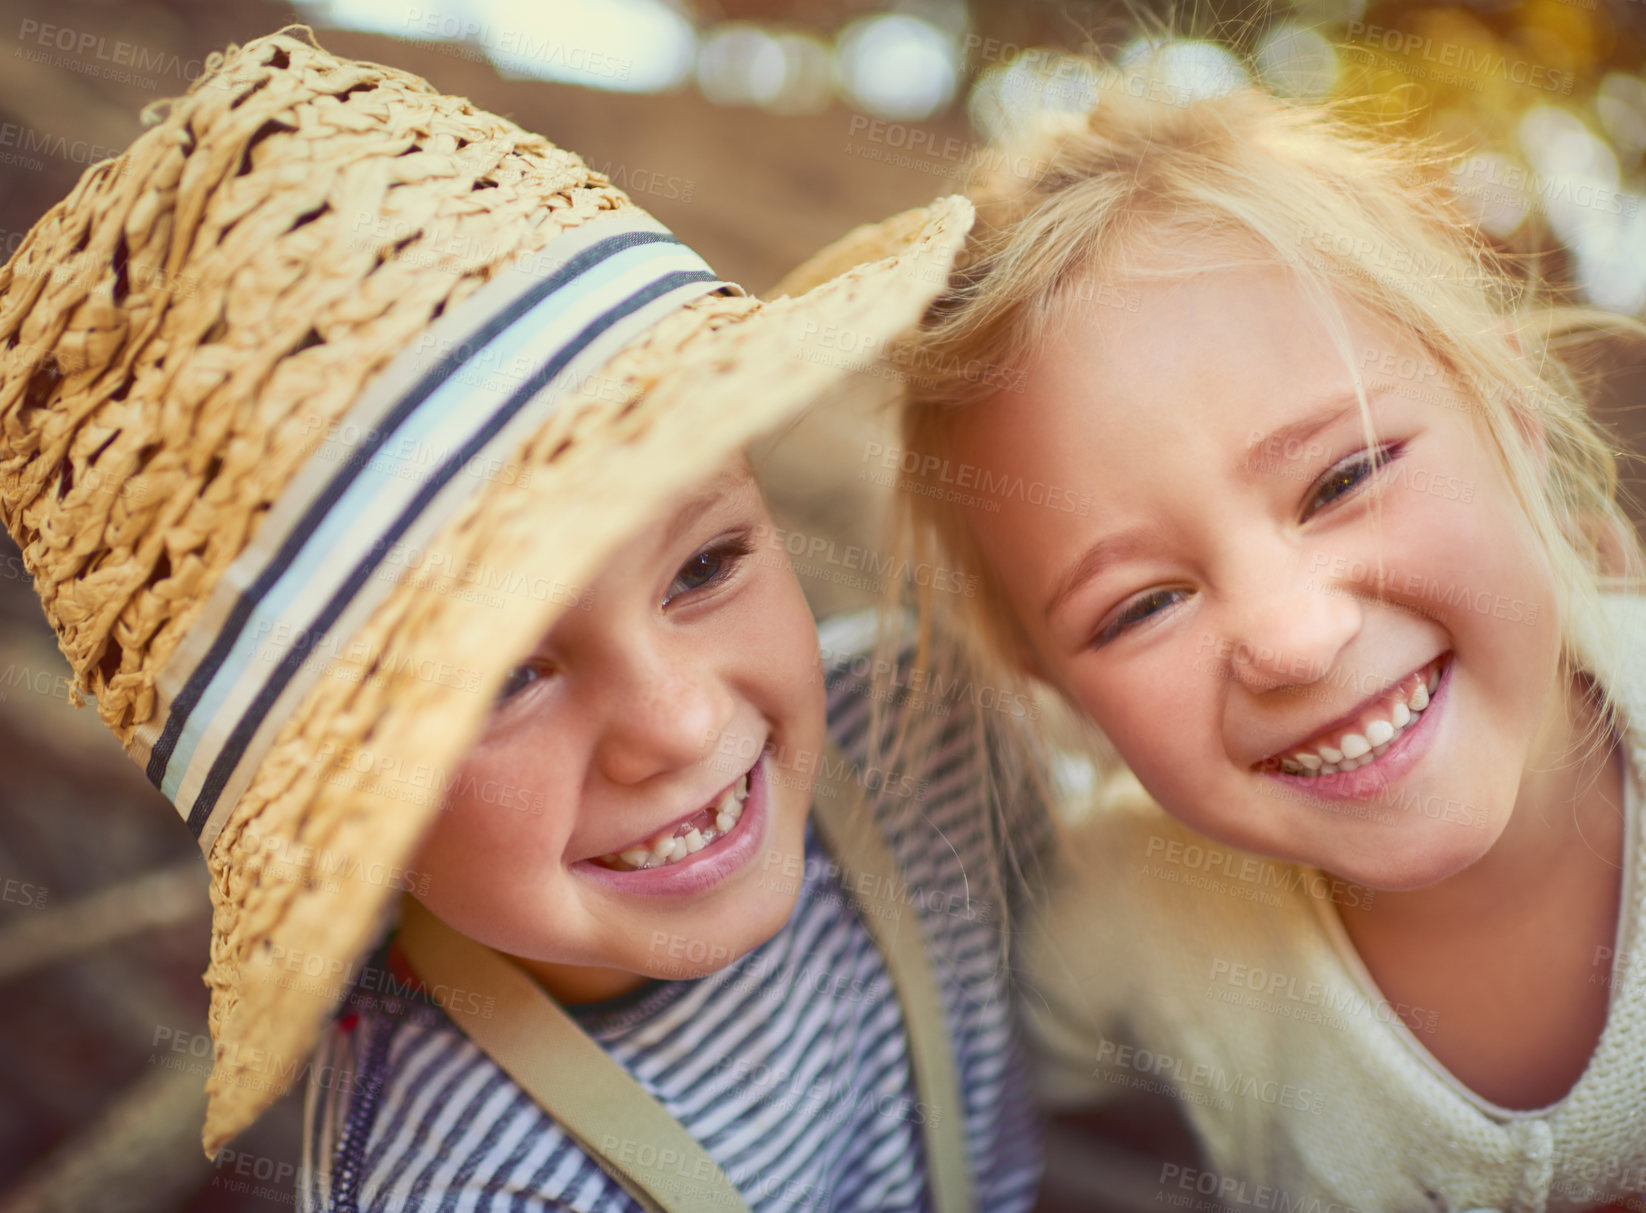 Buy stock photo Portrait of two little children playing together outdoors